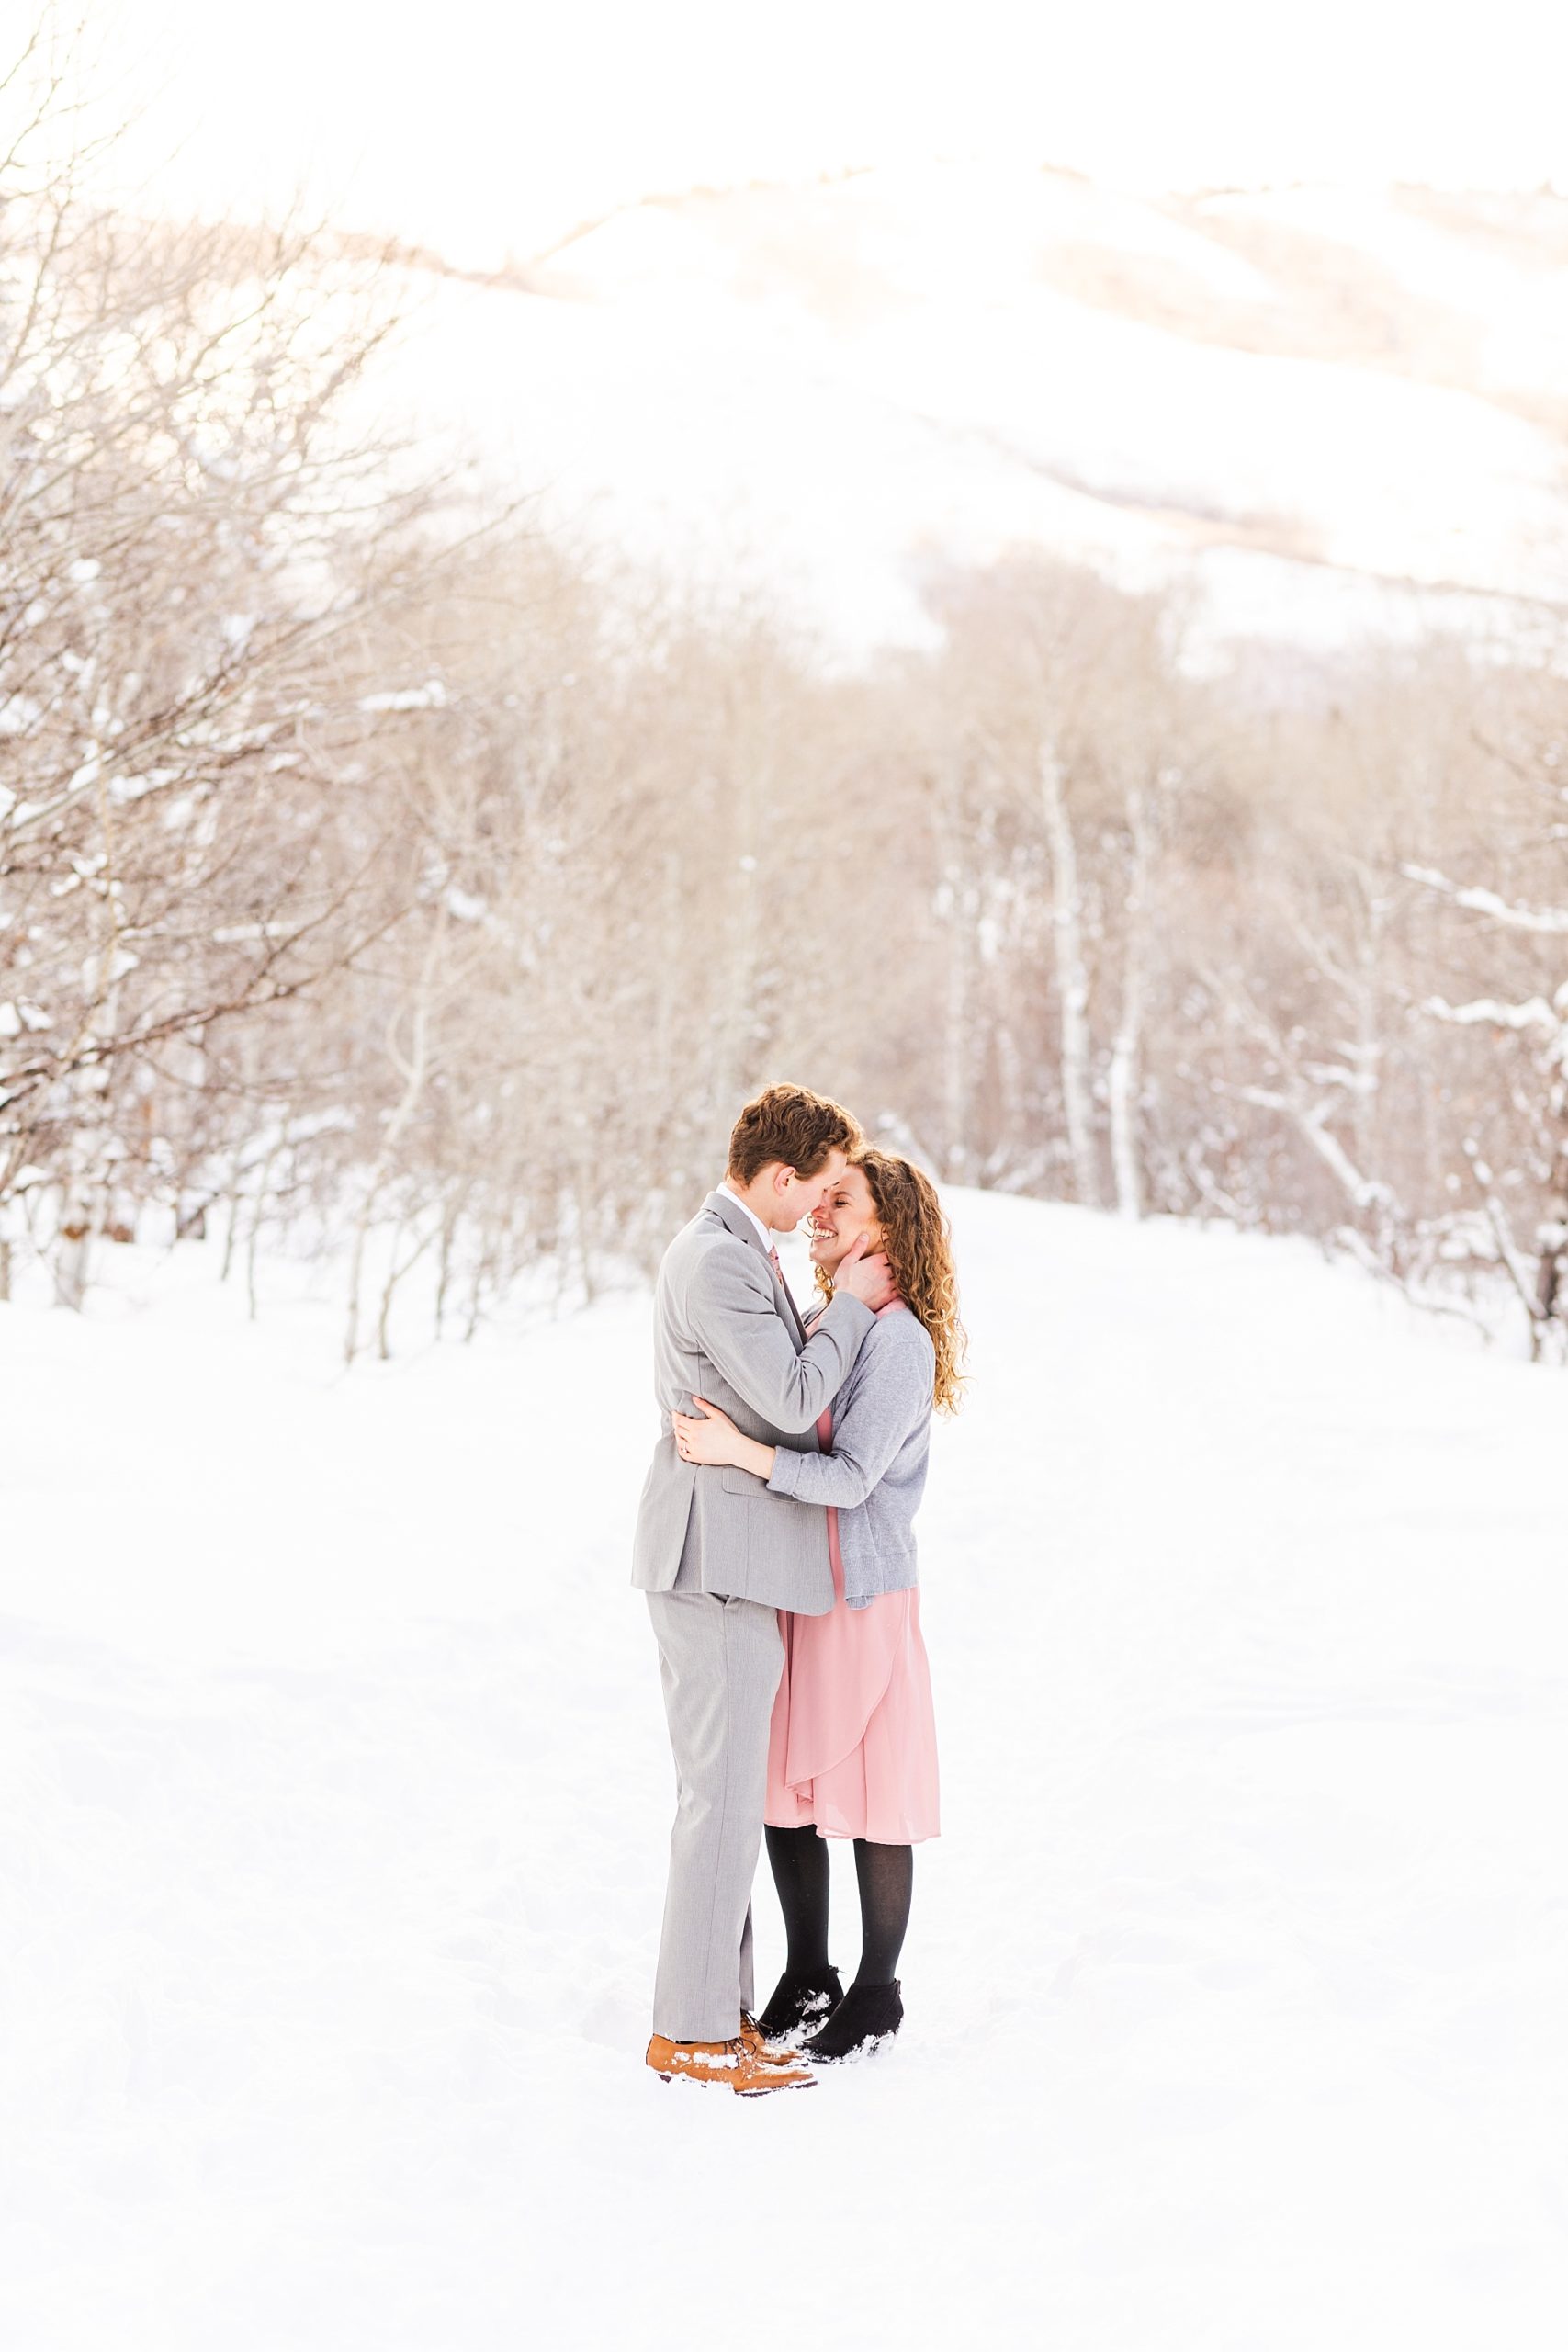 Snowy winter engagement session in the beautiful Utah mountains.